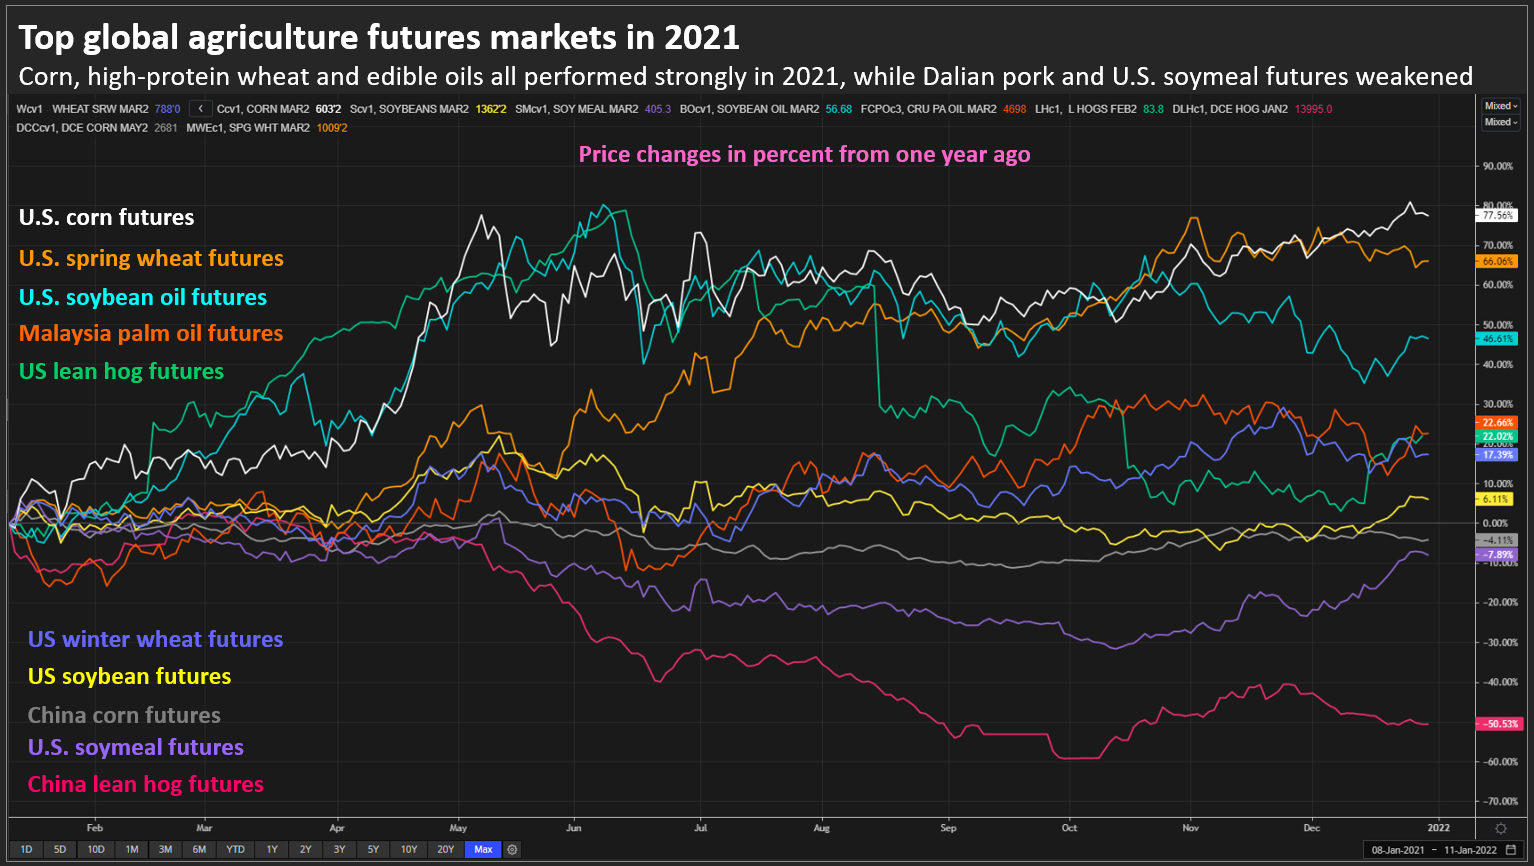 Main global agricultural futures markets in 2021